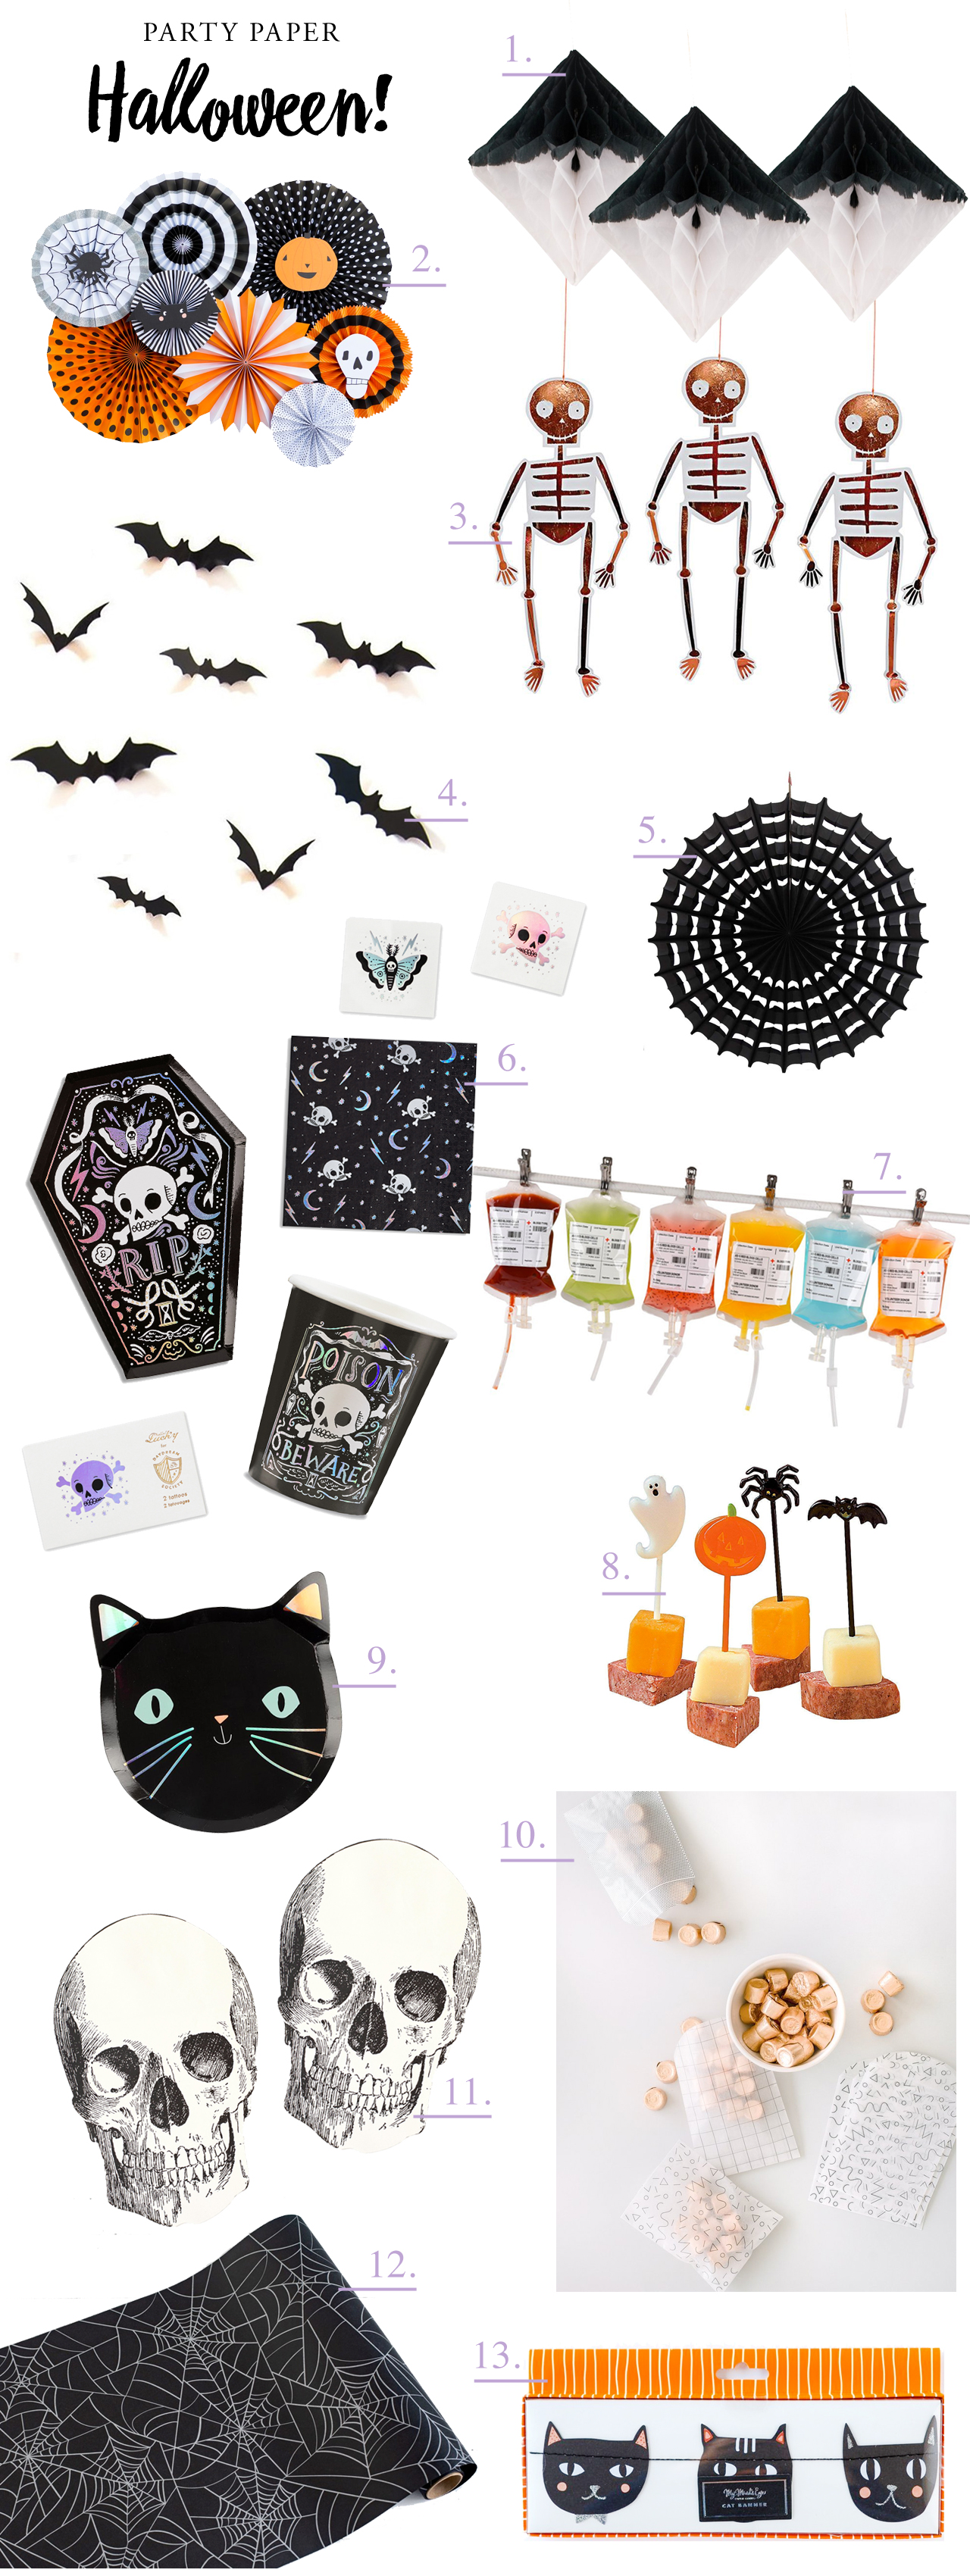 Cute and Quirky Halloween Party DÃ©cor